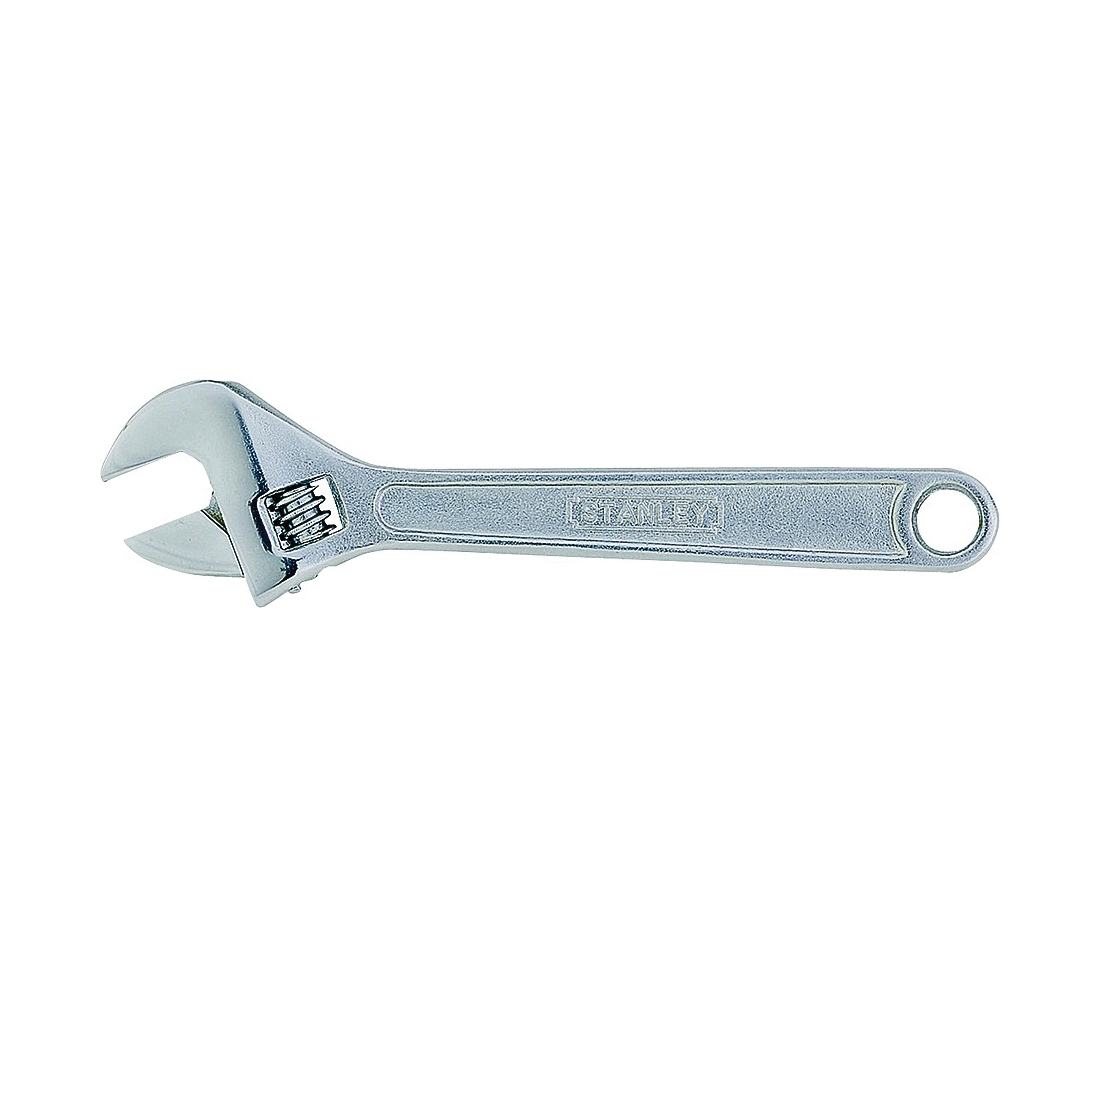 Stanley 87-369 Adjustable Wrench, 8 in OAL, 1-1/20 in Jaw, Steel, Chrome